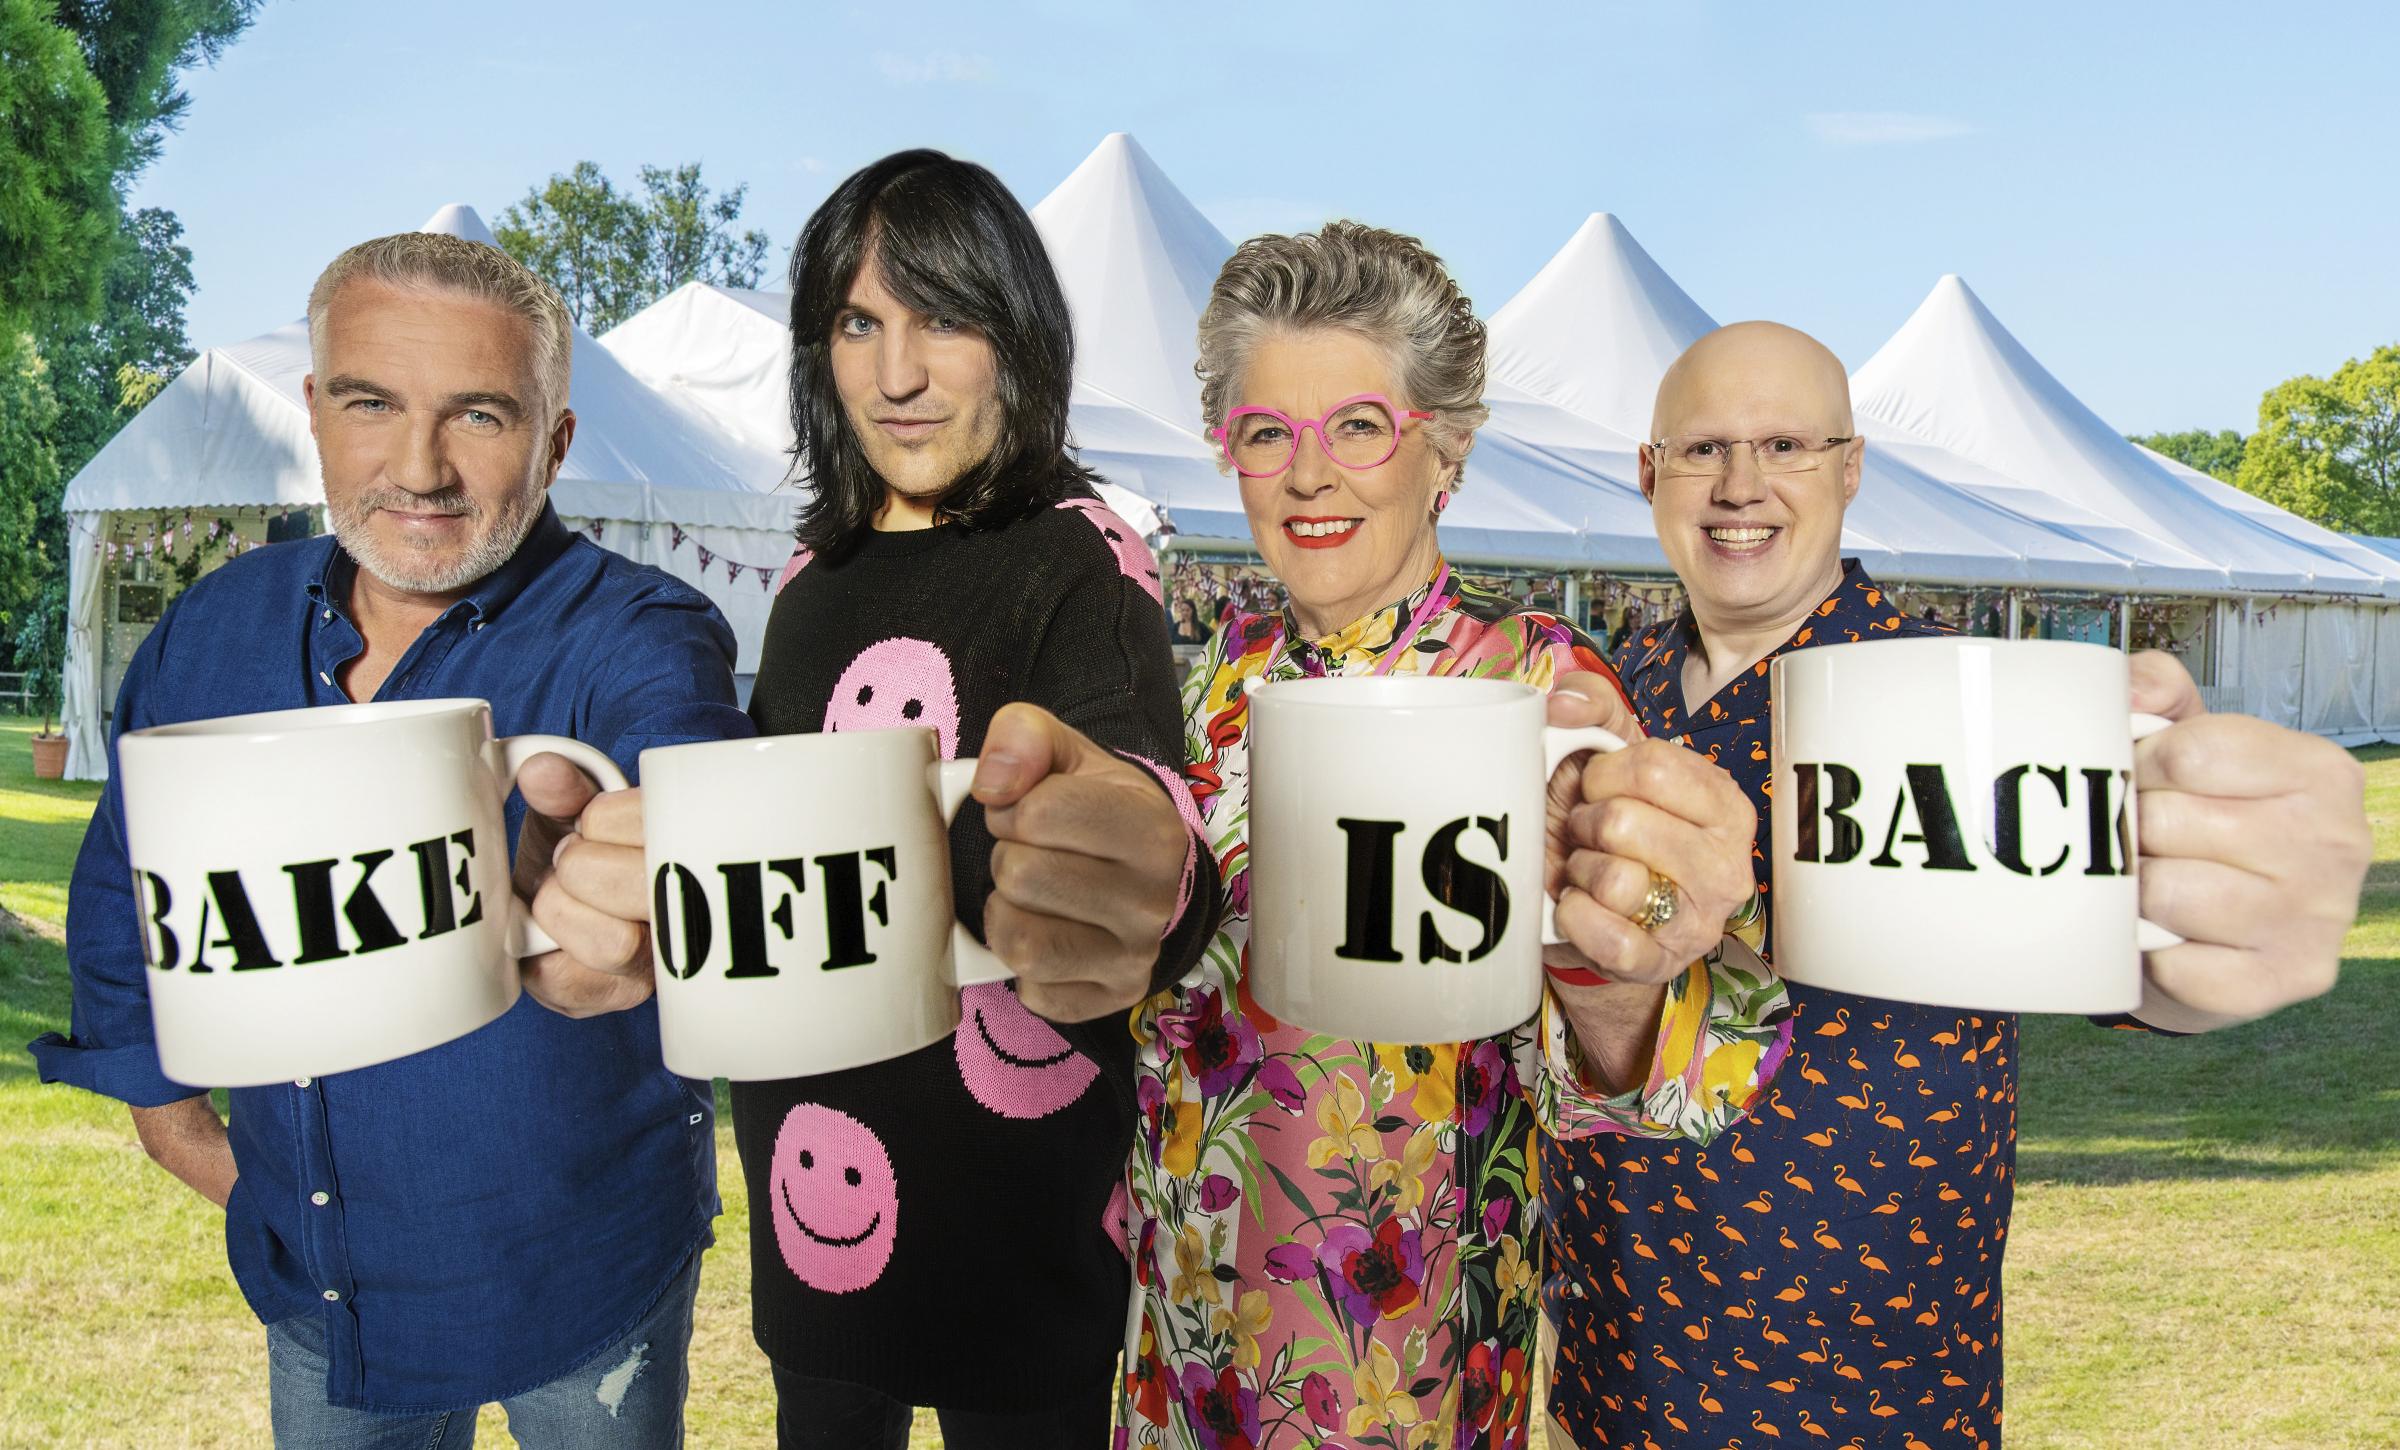 Undated handout photo issued by C4/Love Productions of (left to right) Paul Hollywood, Noel Fielding, Prue Leith, Matt Lucas from The Great British Bake Off 2021.